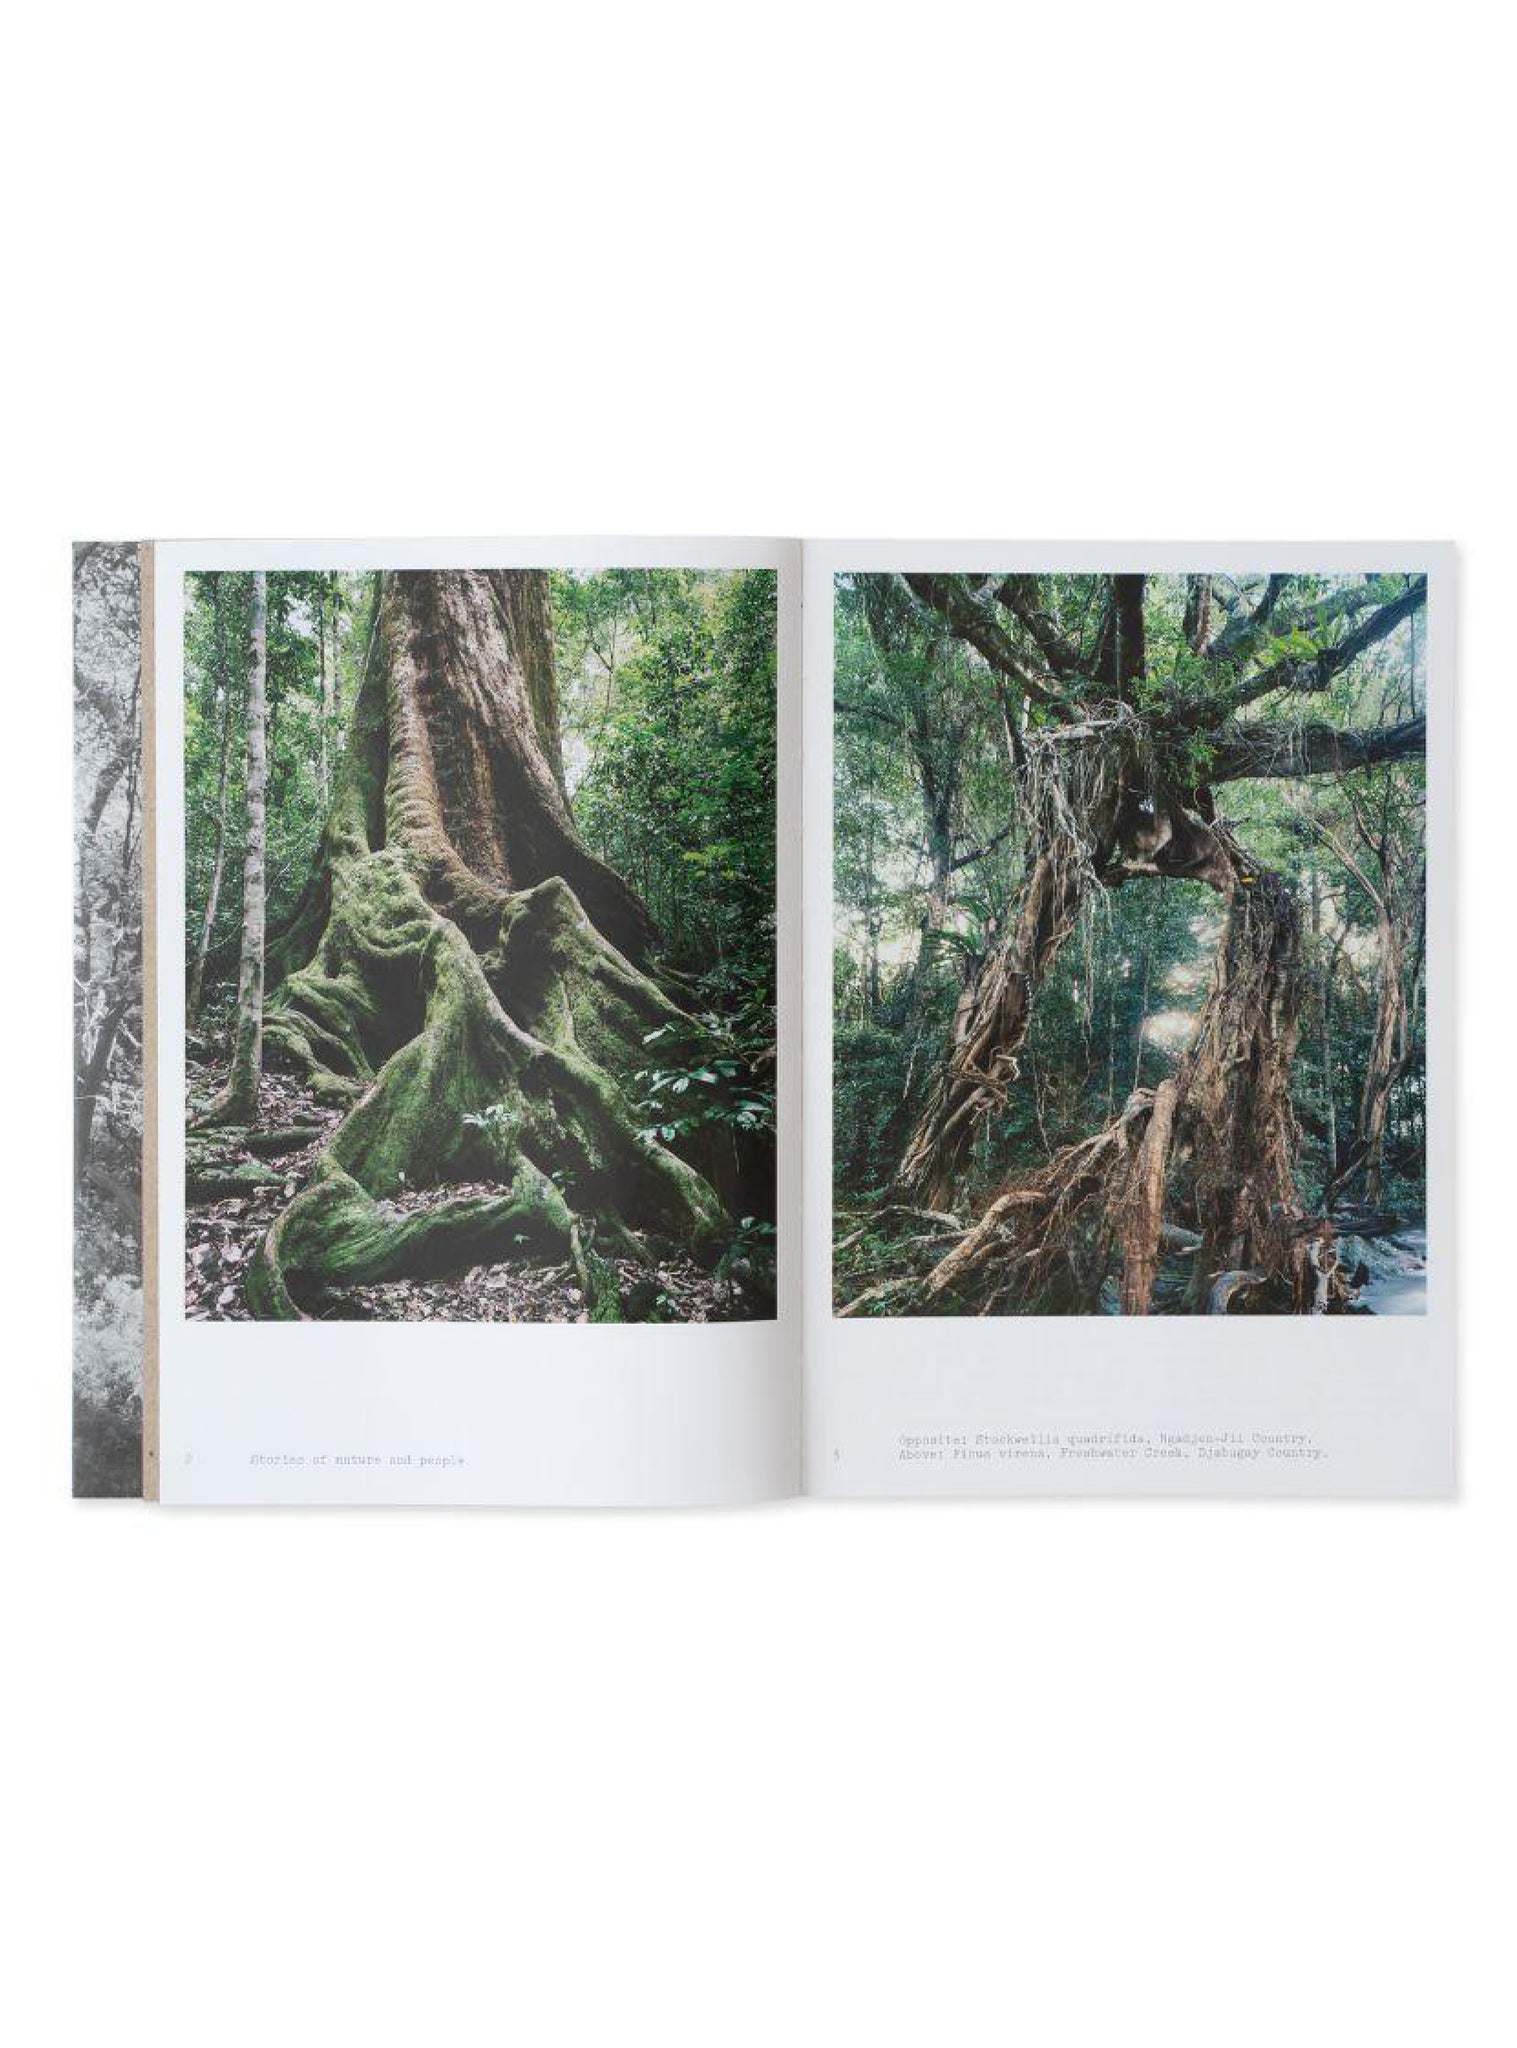 Wilderness Journal: Stories of Nature and people Vol 2